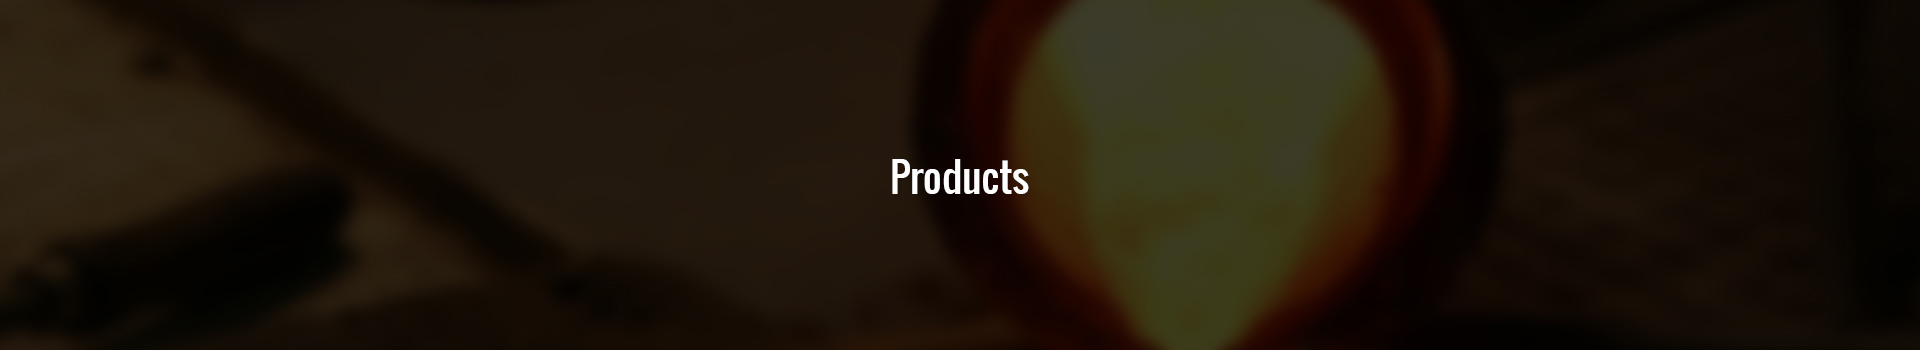 product-banner